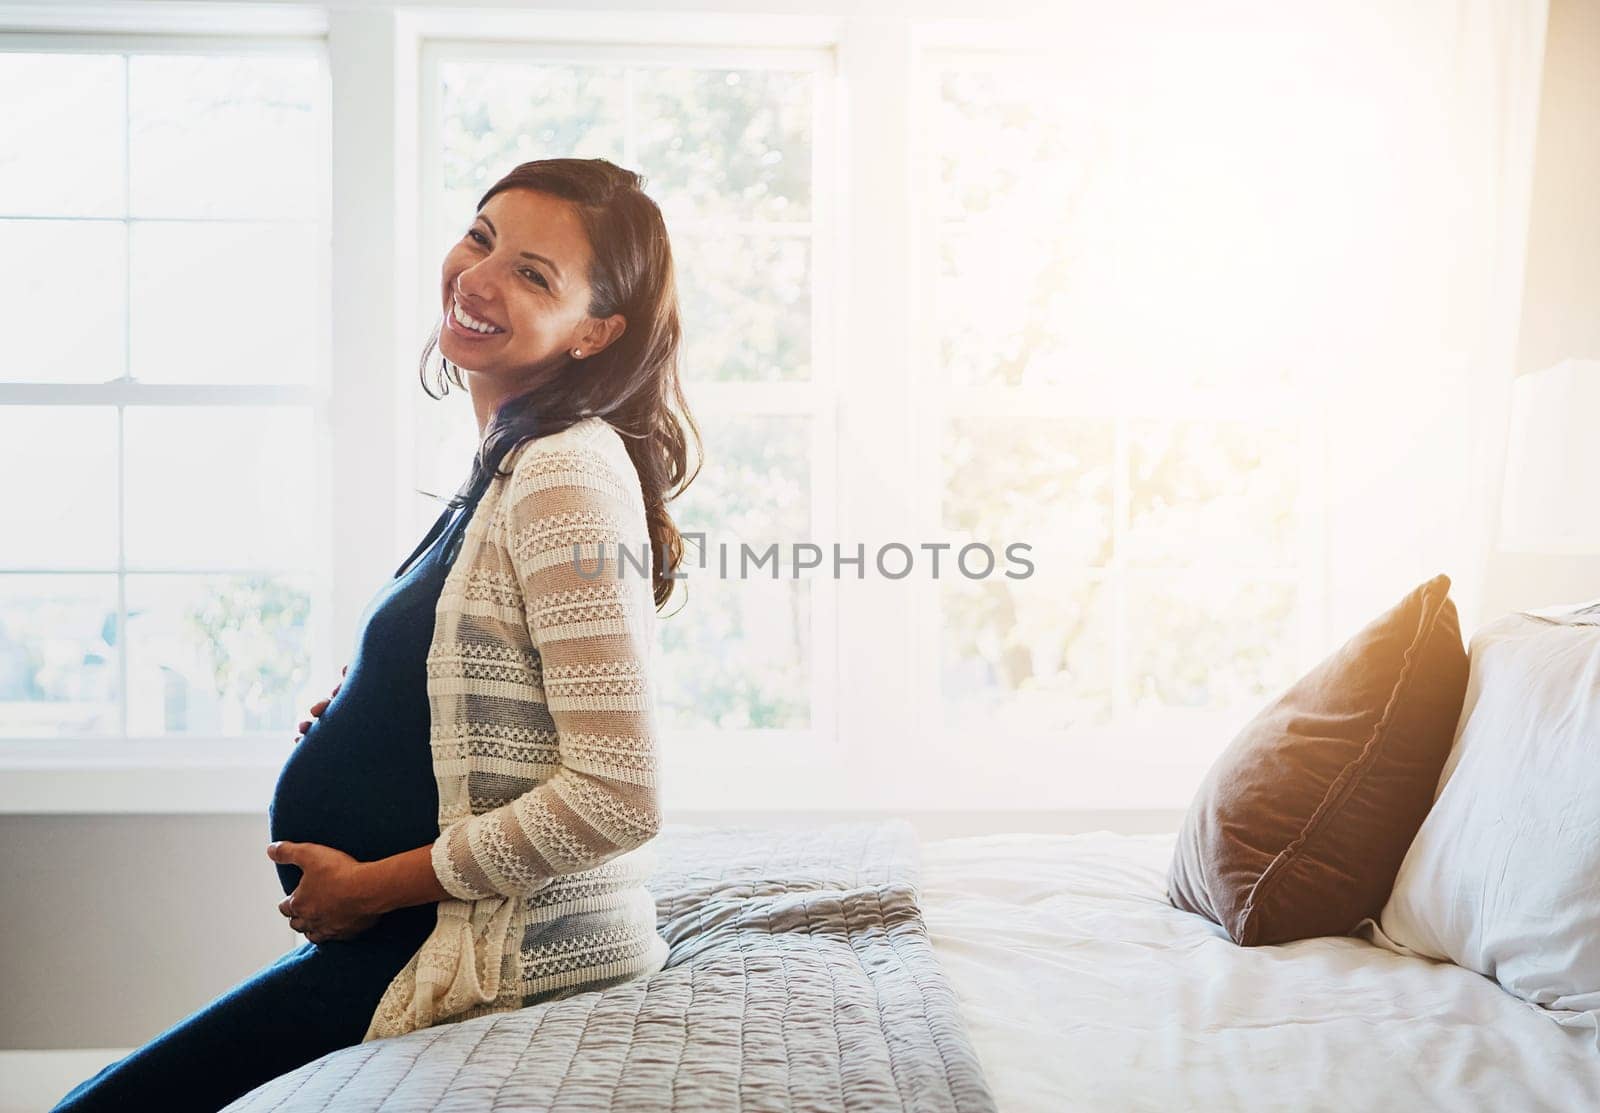 Bedroom, happiness and home portrait of pregnant woman holding stomach, abdomen or belly with love, care and baby support. Pregnancy, bed and person smile, maternity and hope for future life growth.